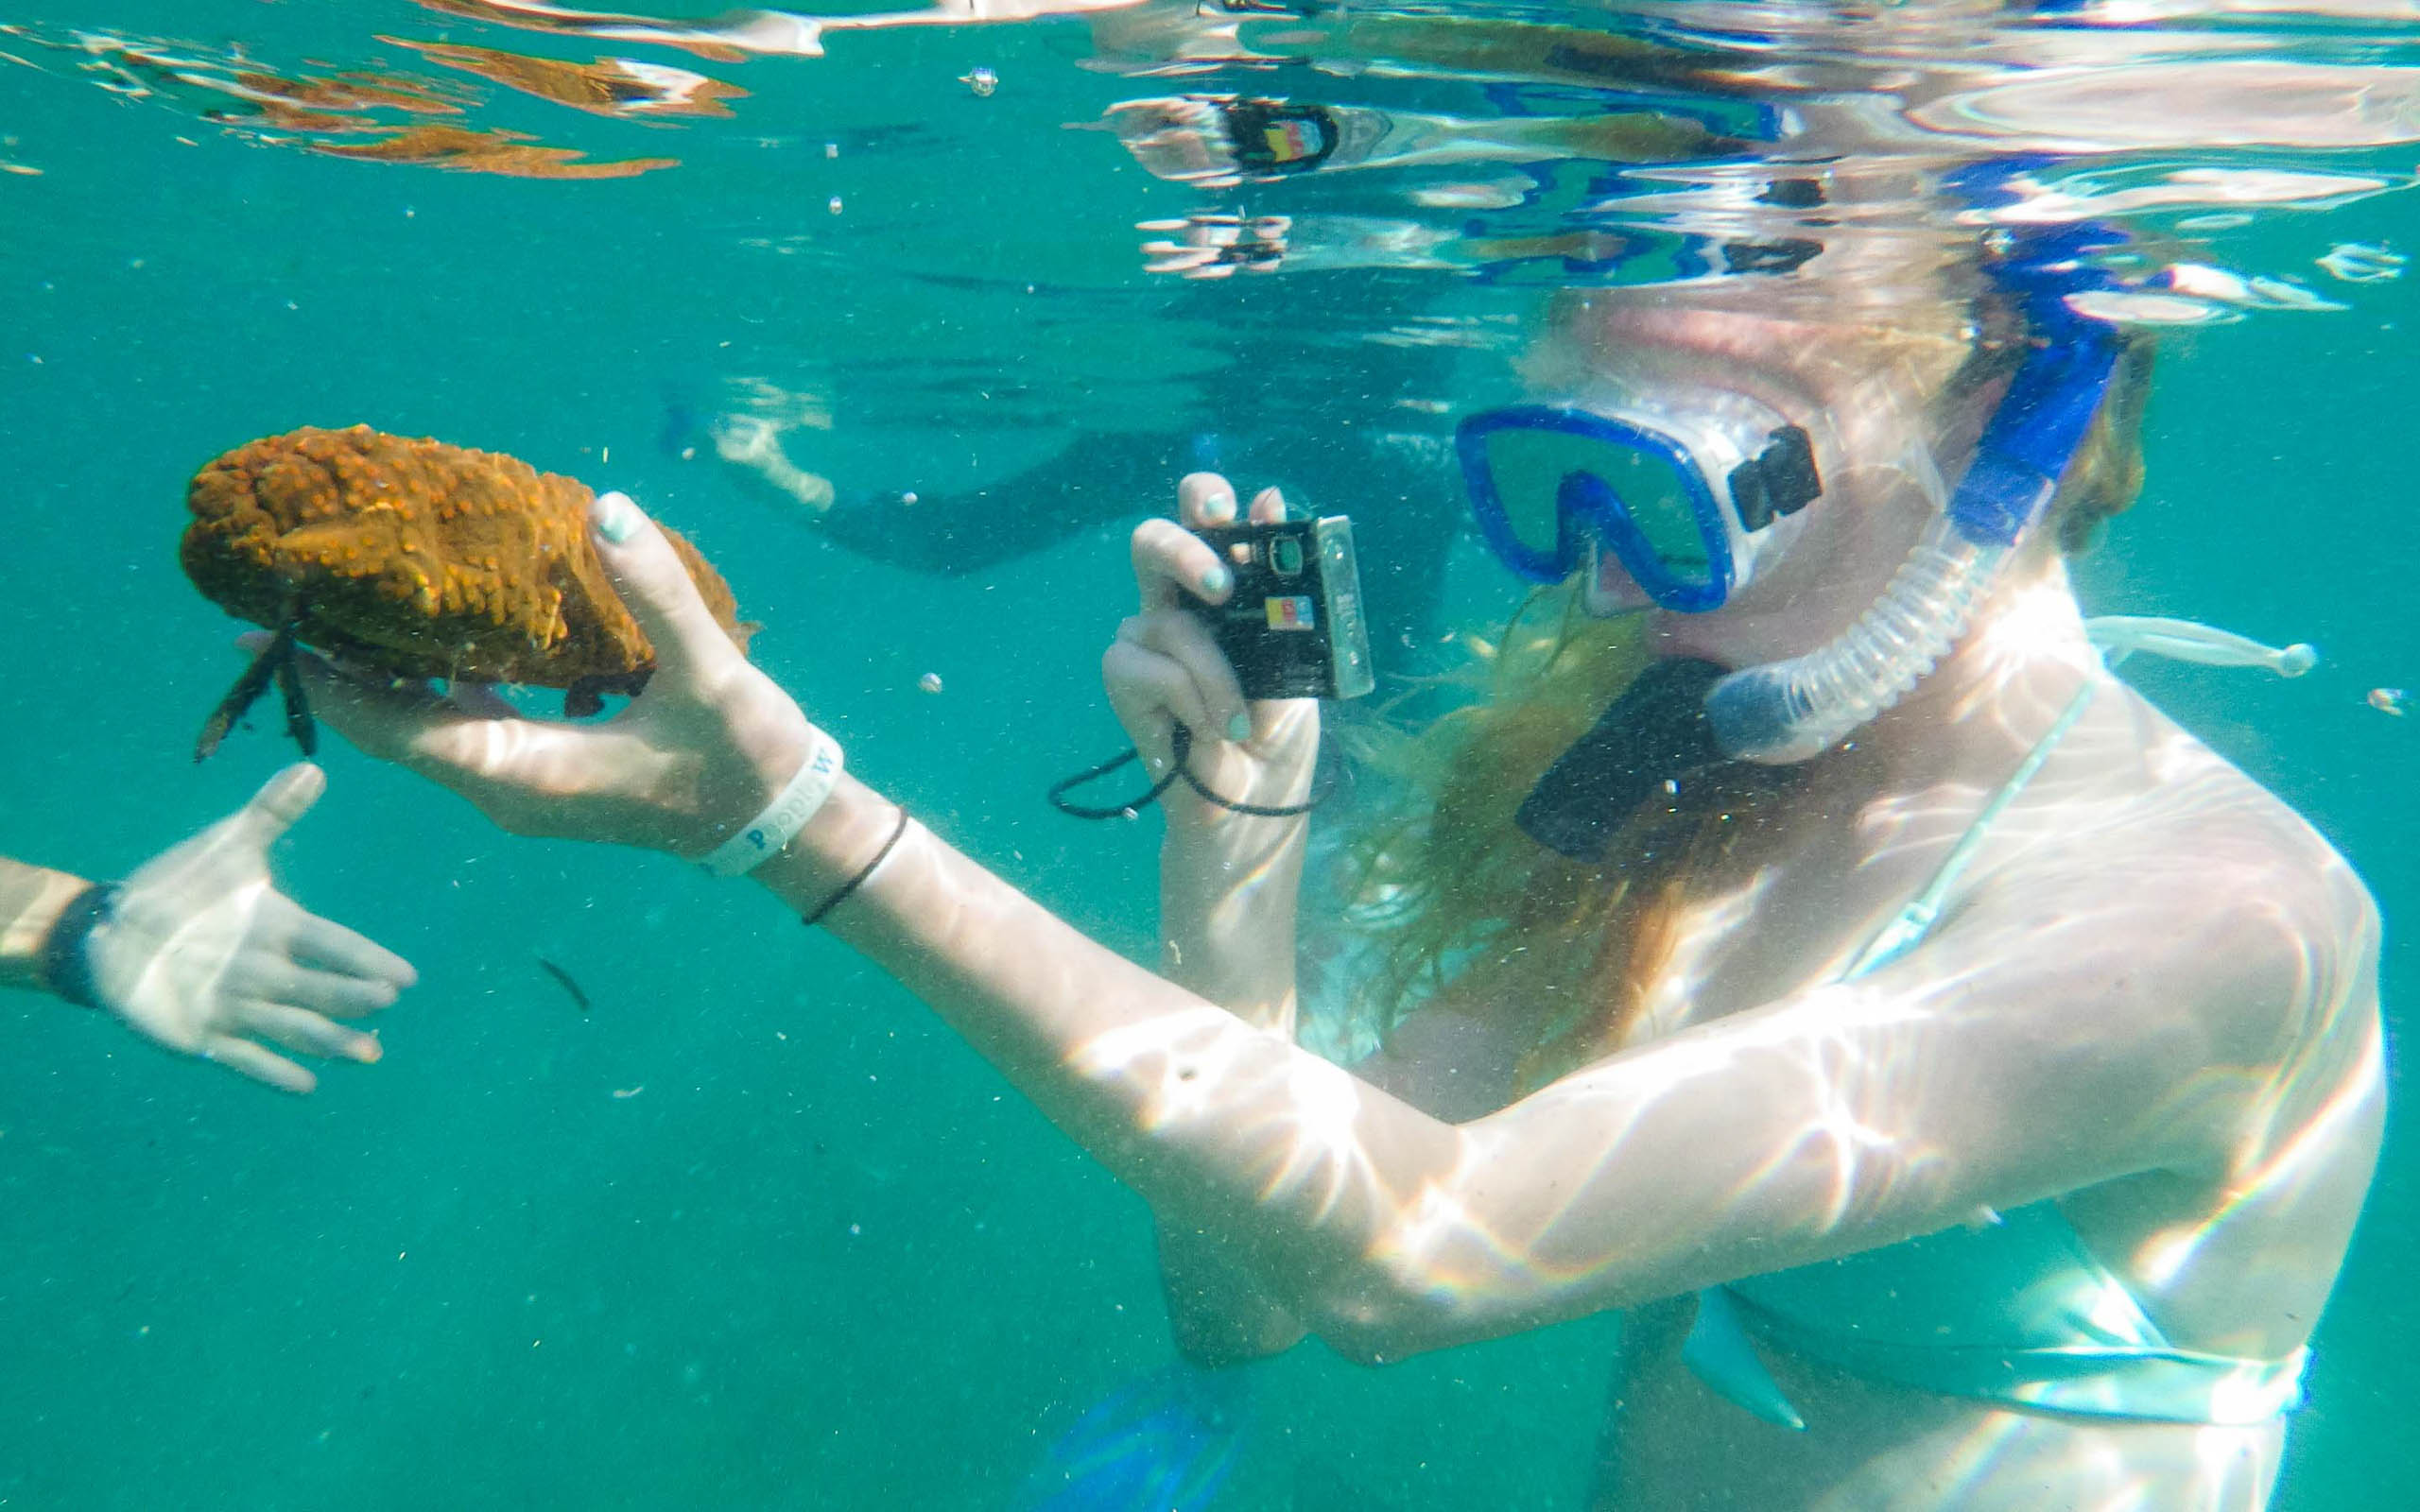 A woman snorks in the water while holding a rock.